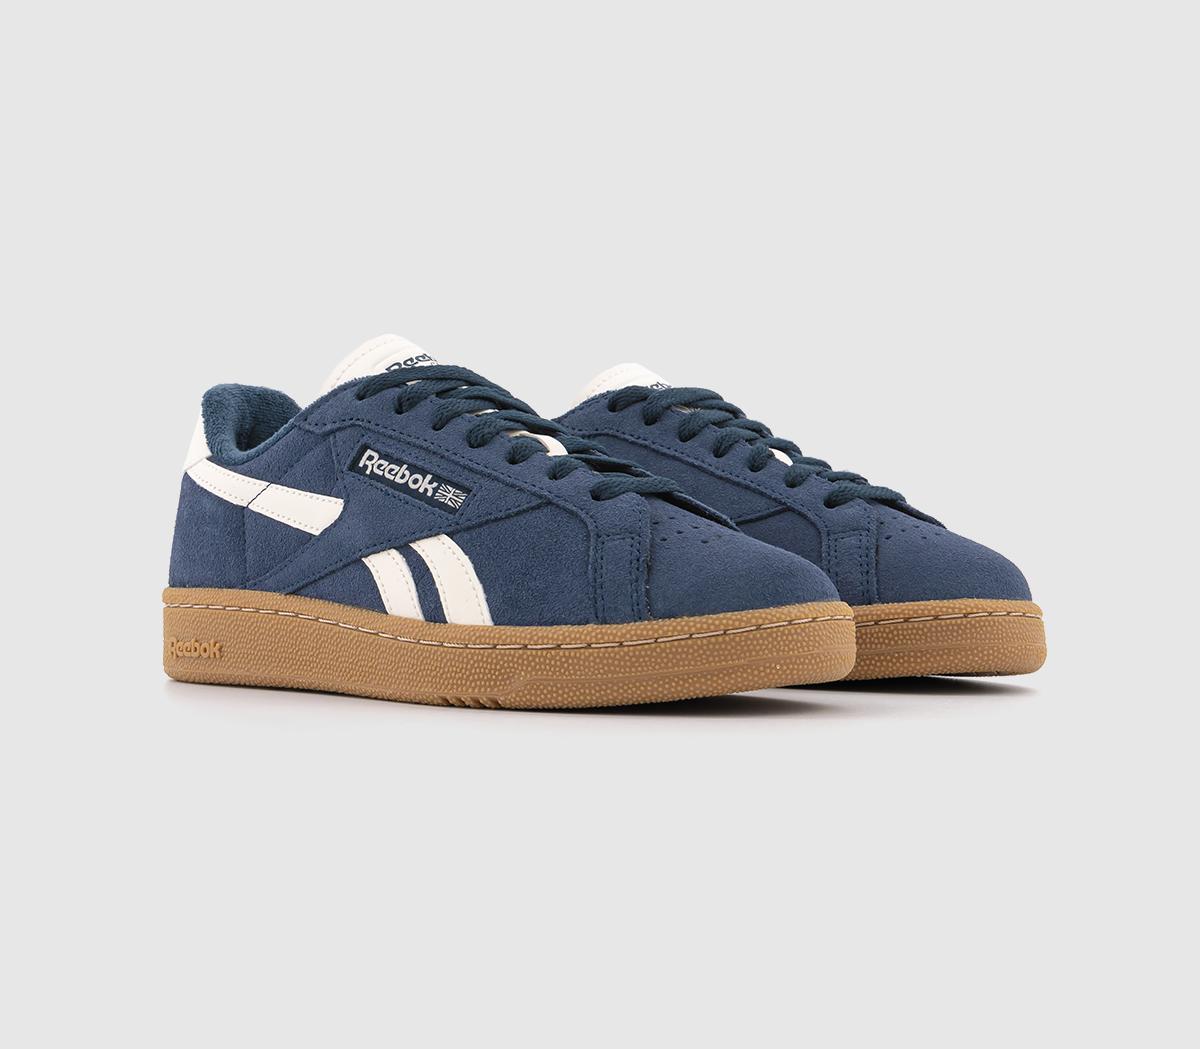 Reebok Womens Club C Grounds Trainers Vector Navy Blue, 11